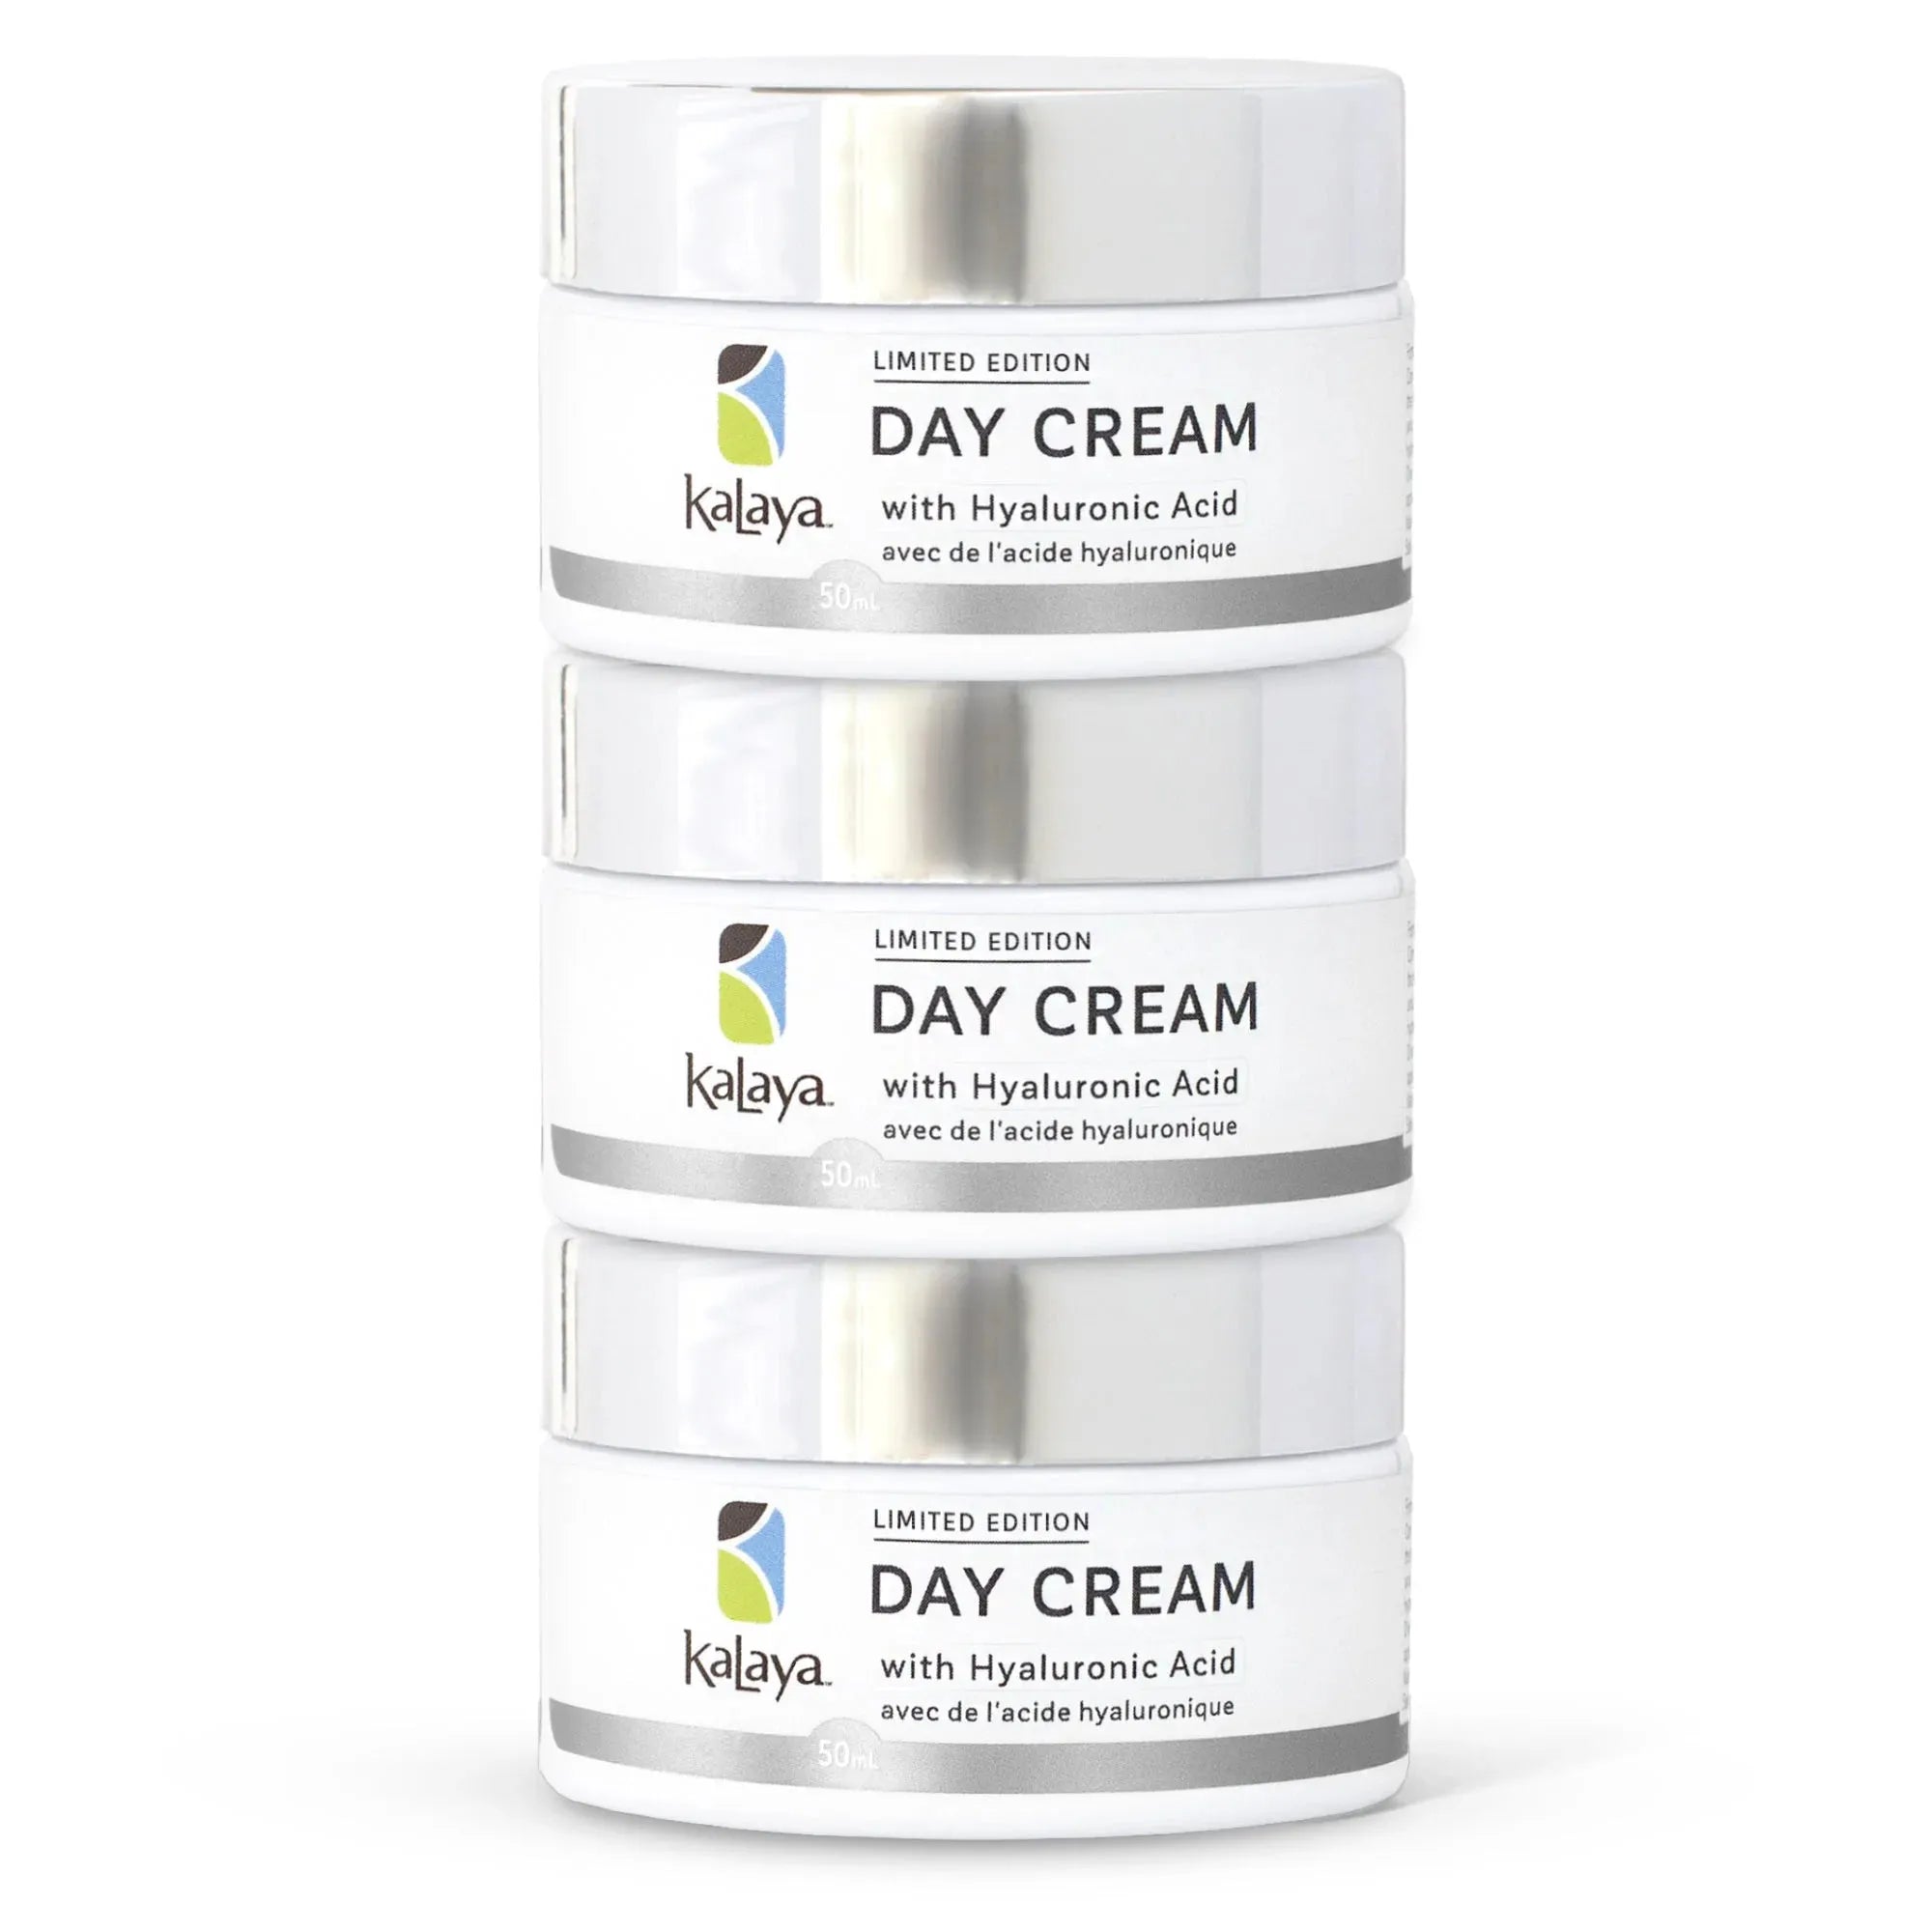 KaLaya Day Cream with Hyaluronic Acid (Limited Edition)